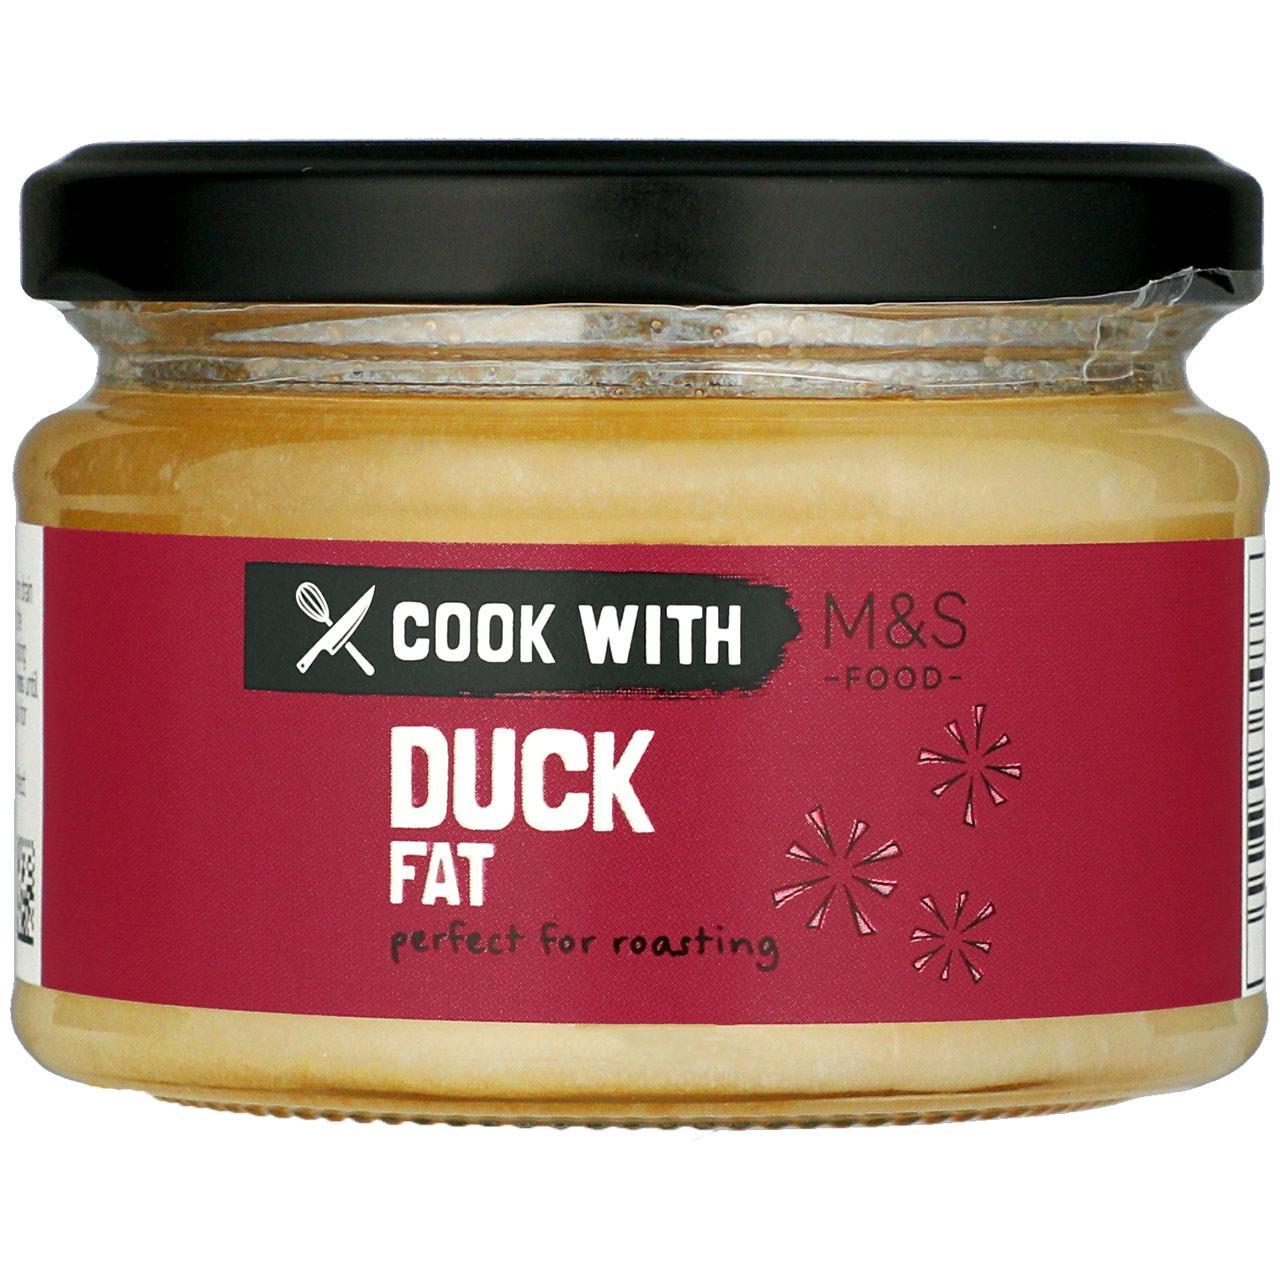 Cook With M&S Duck Fat